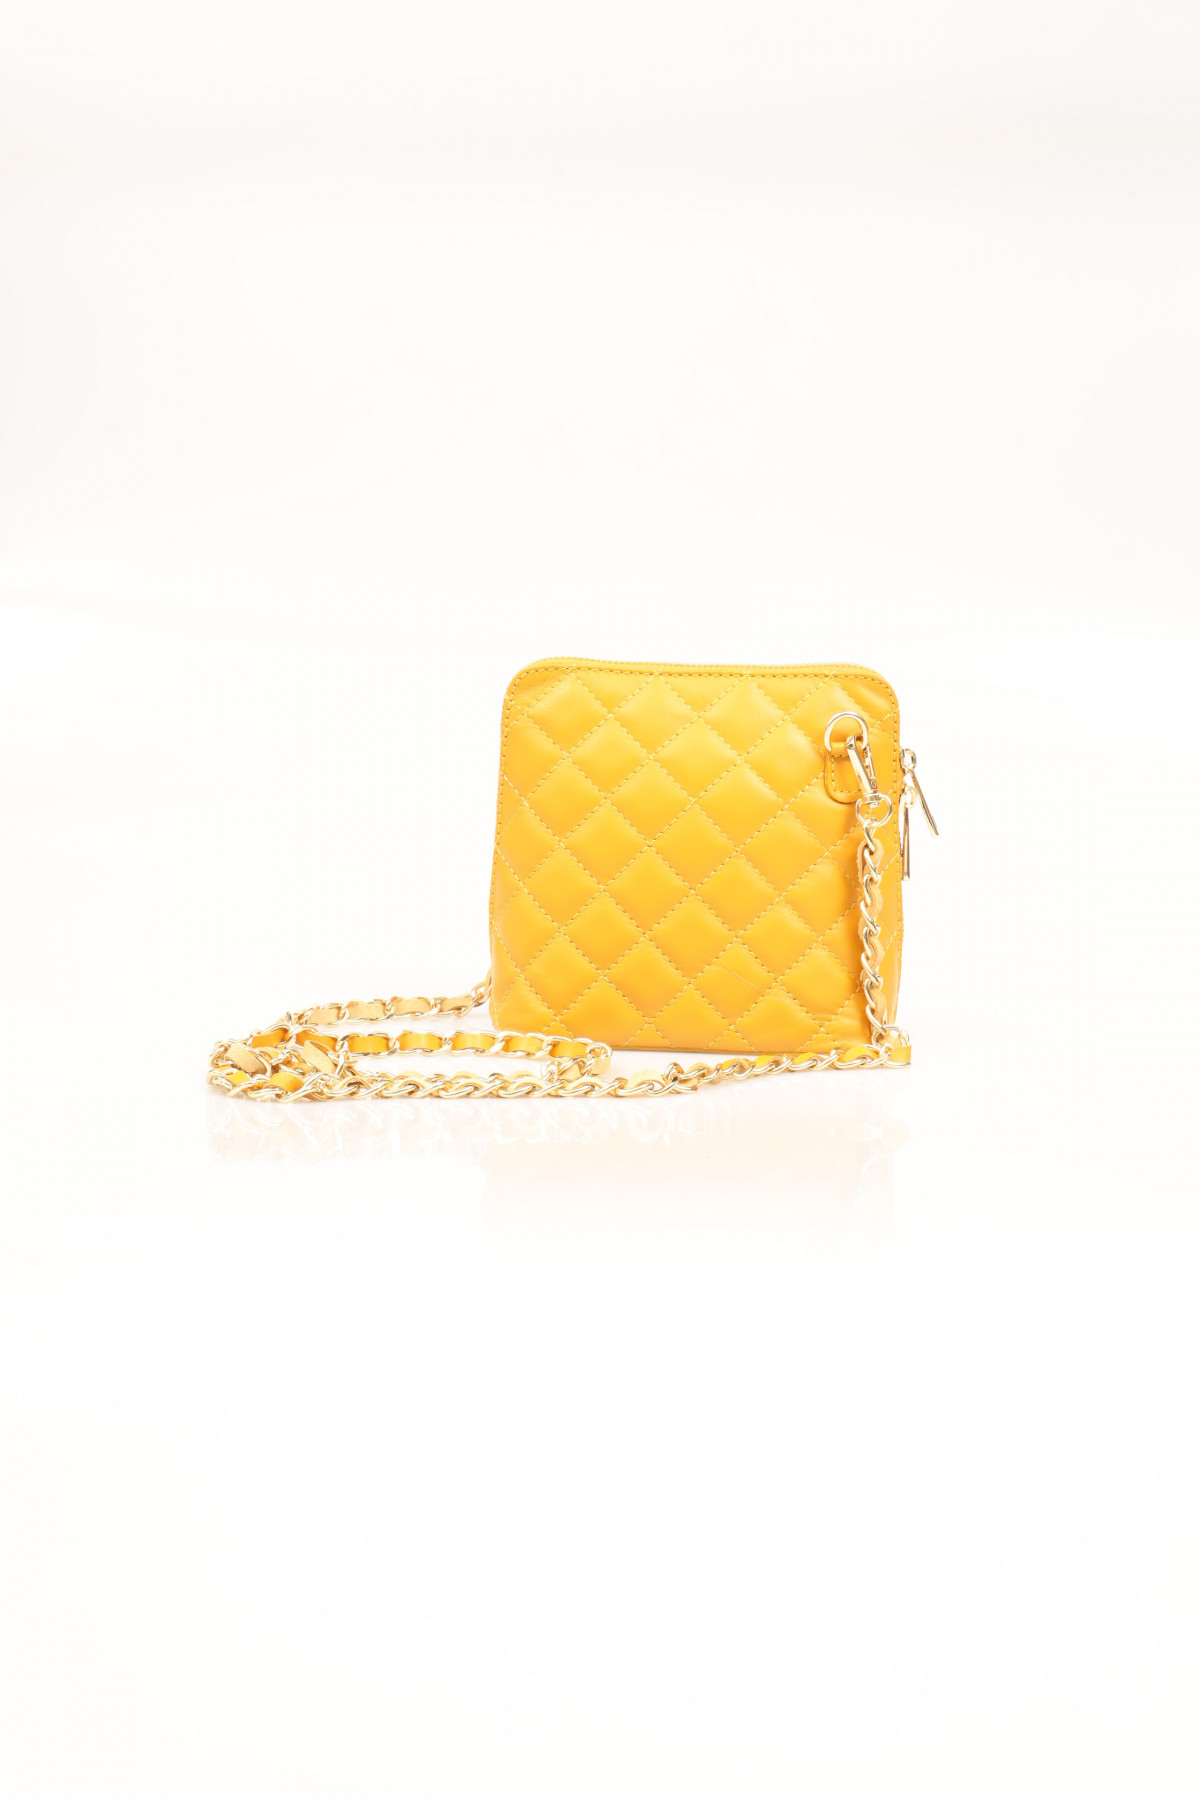 Genuine Quilted Leather Clutch Bag